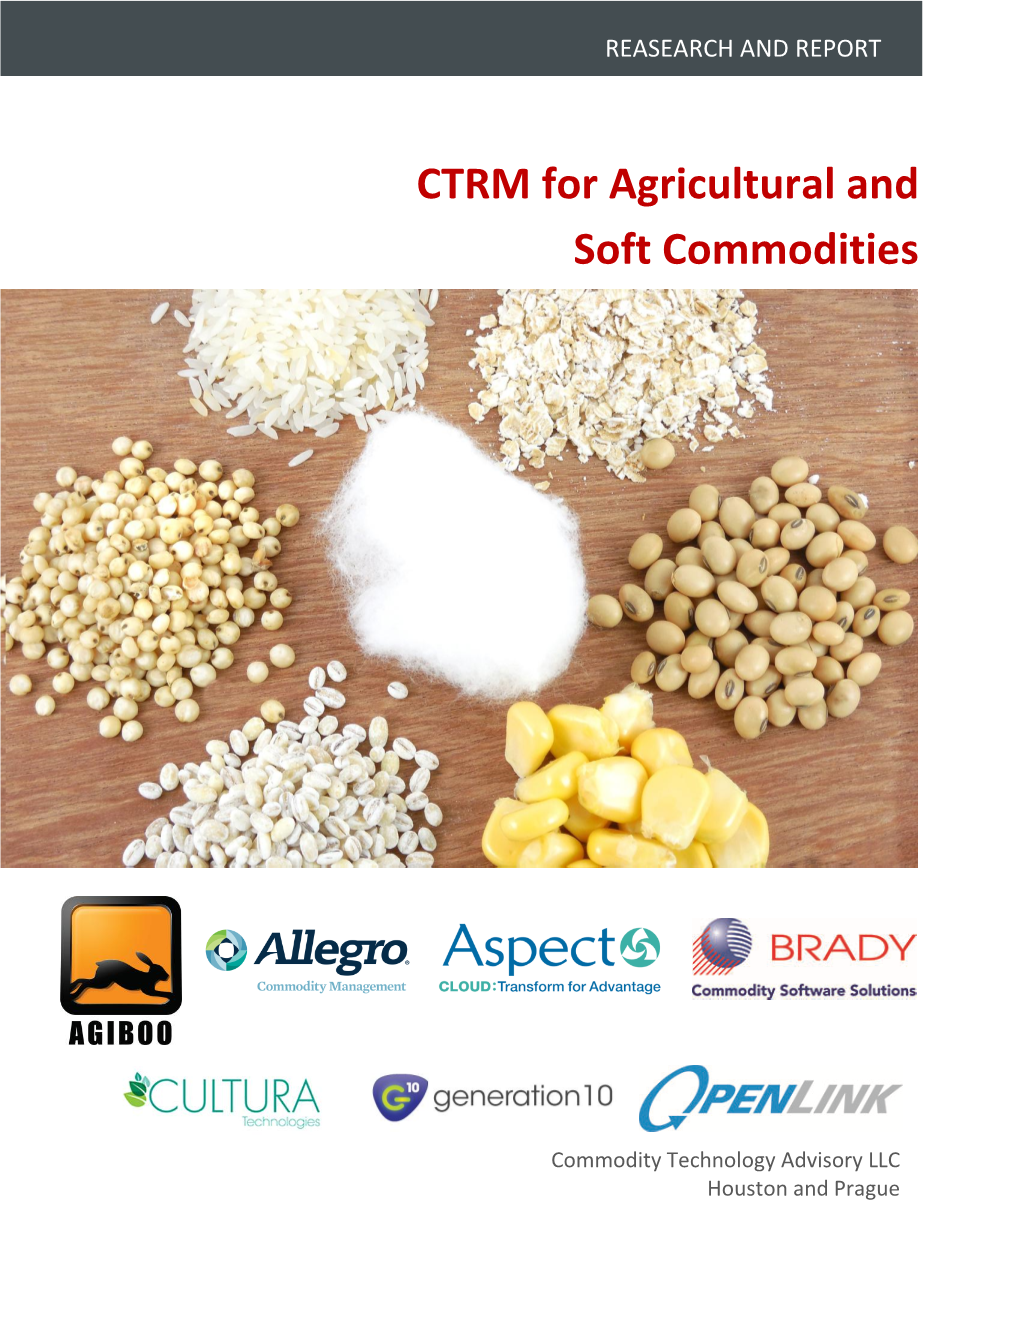 CTRM for Ags and Softs